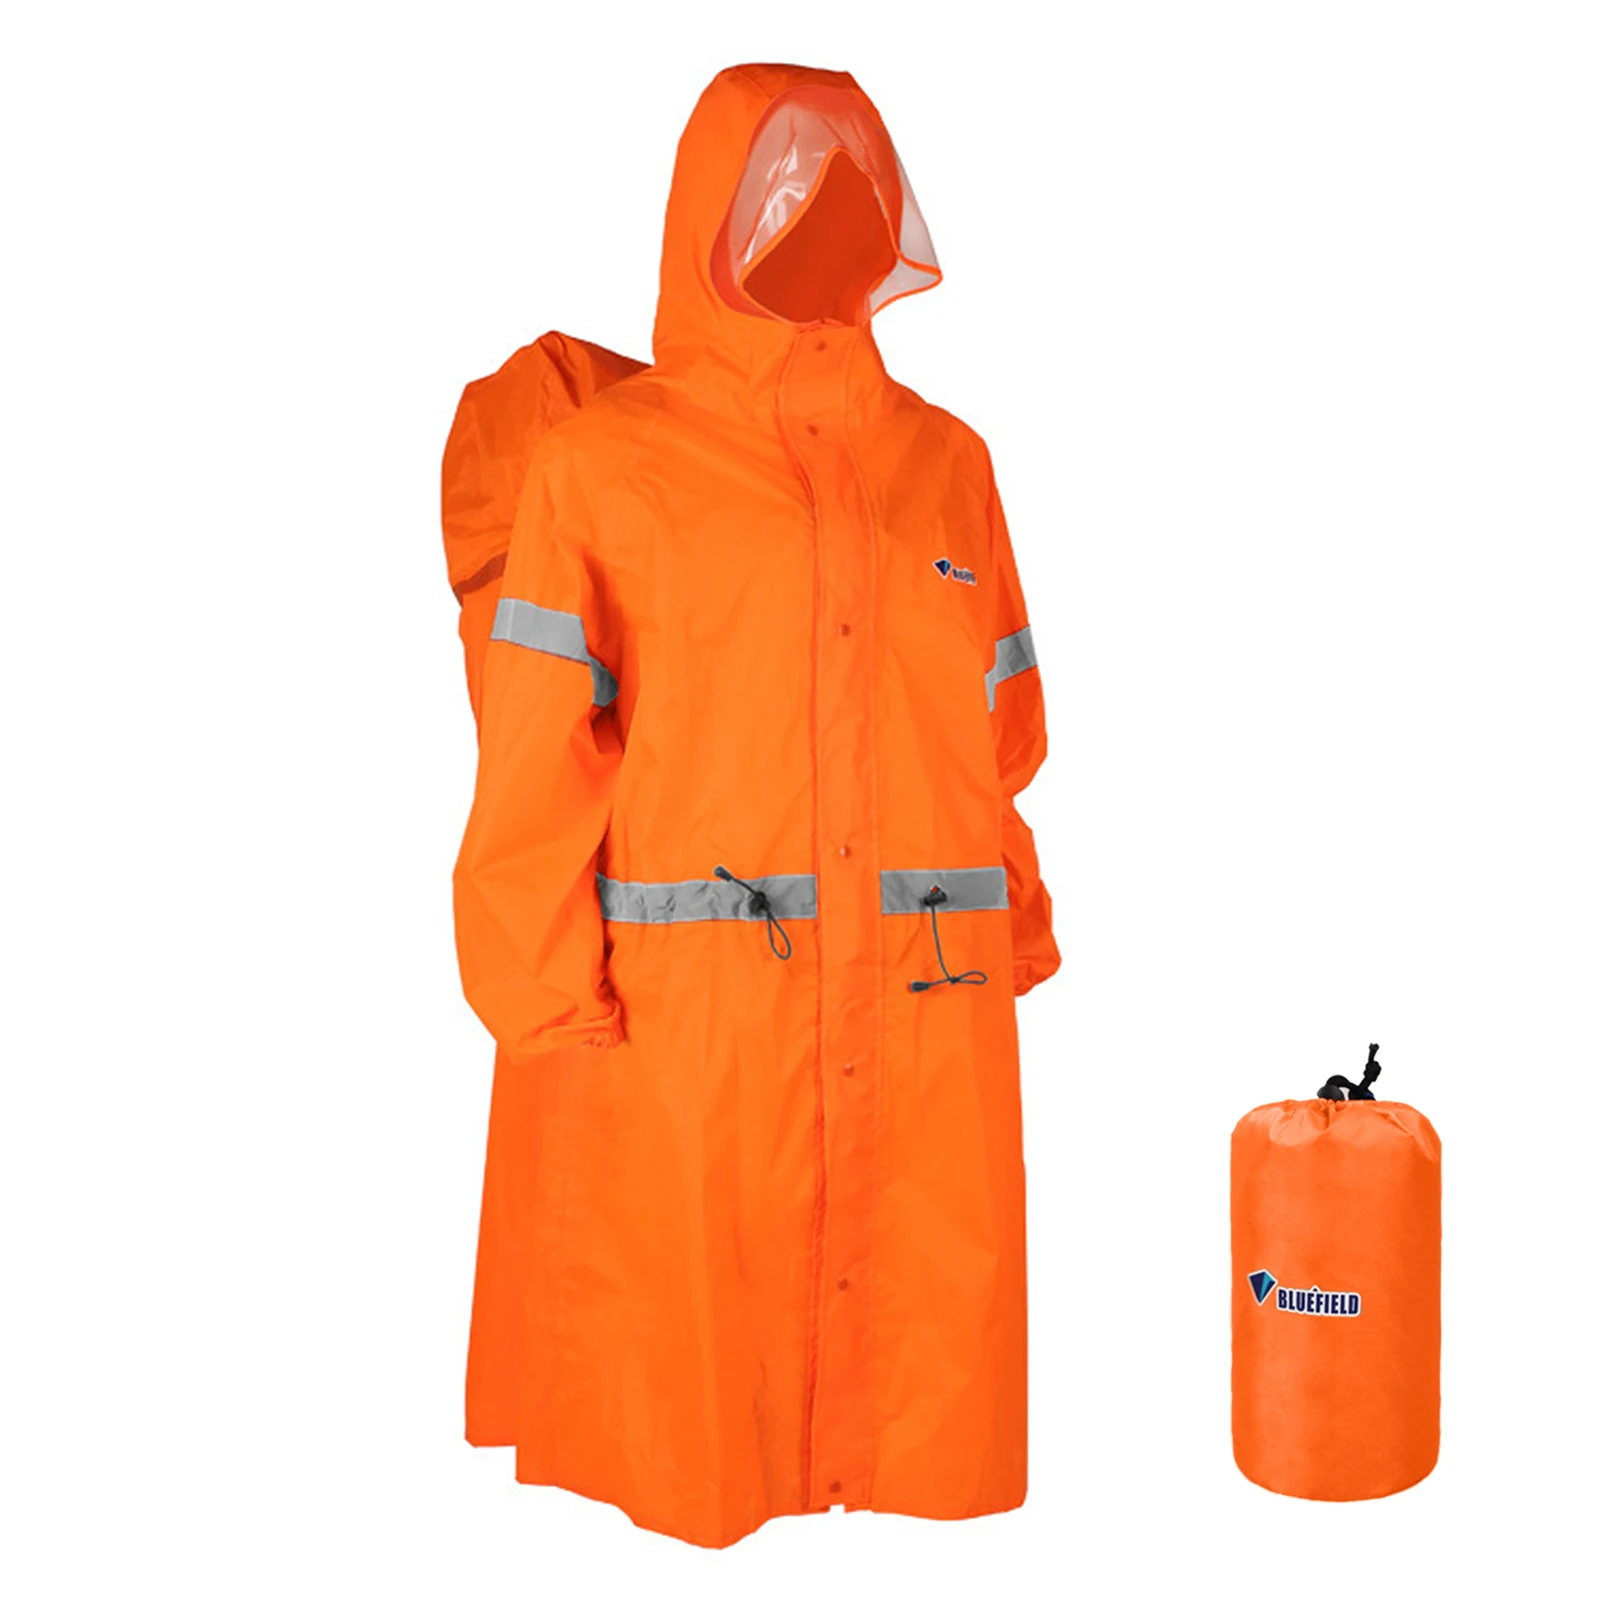 

Hooded Rain Poncho for Adults High-visibility Reflective Waterproof Raincoat Jacket with Backpack Cover Outdoor Rain Gear